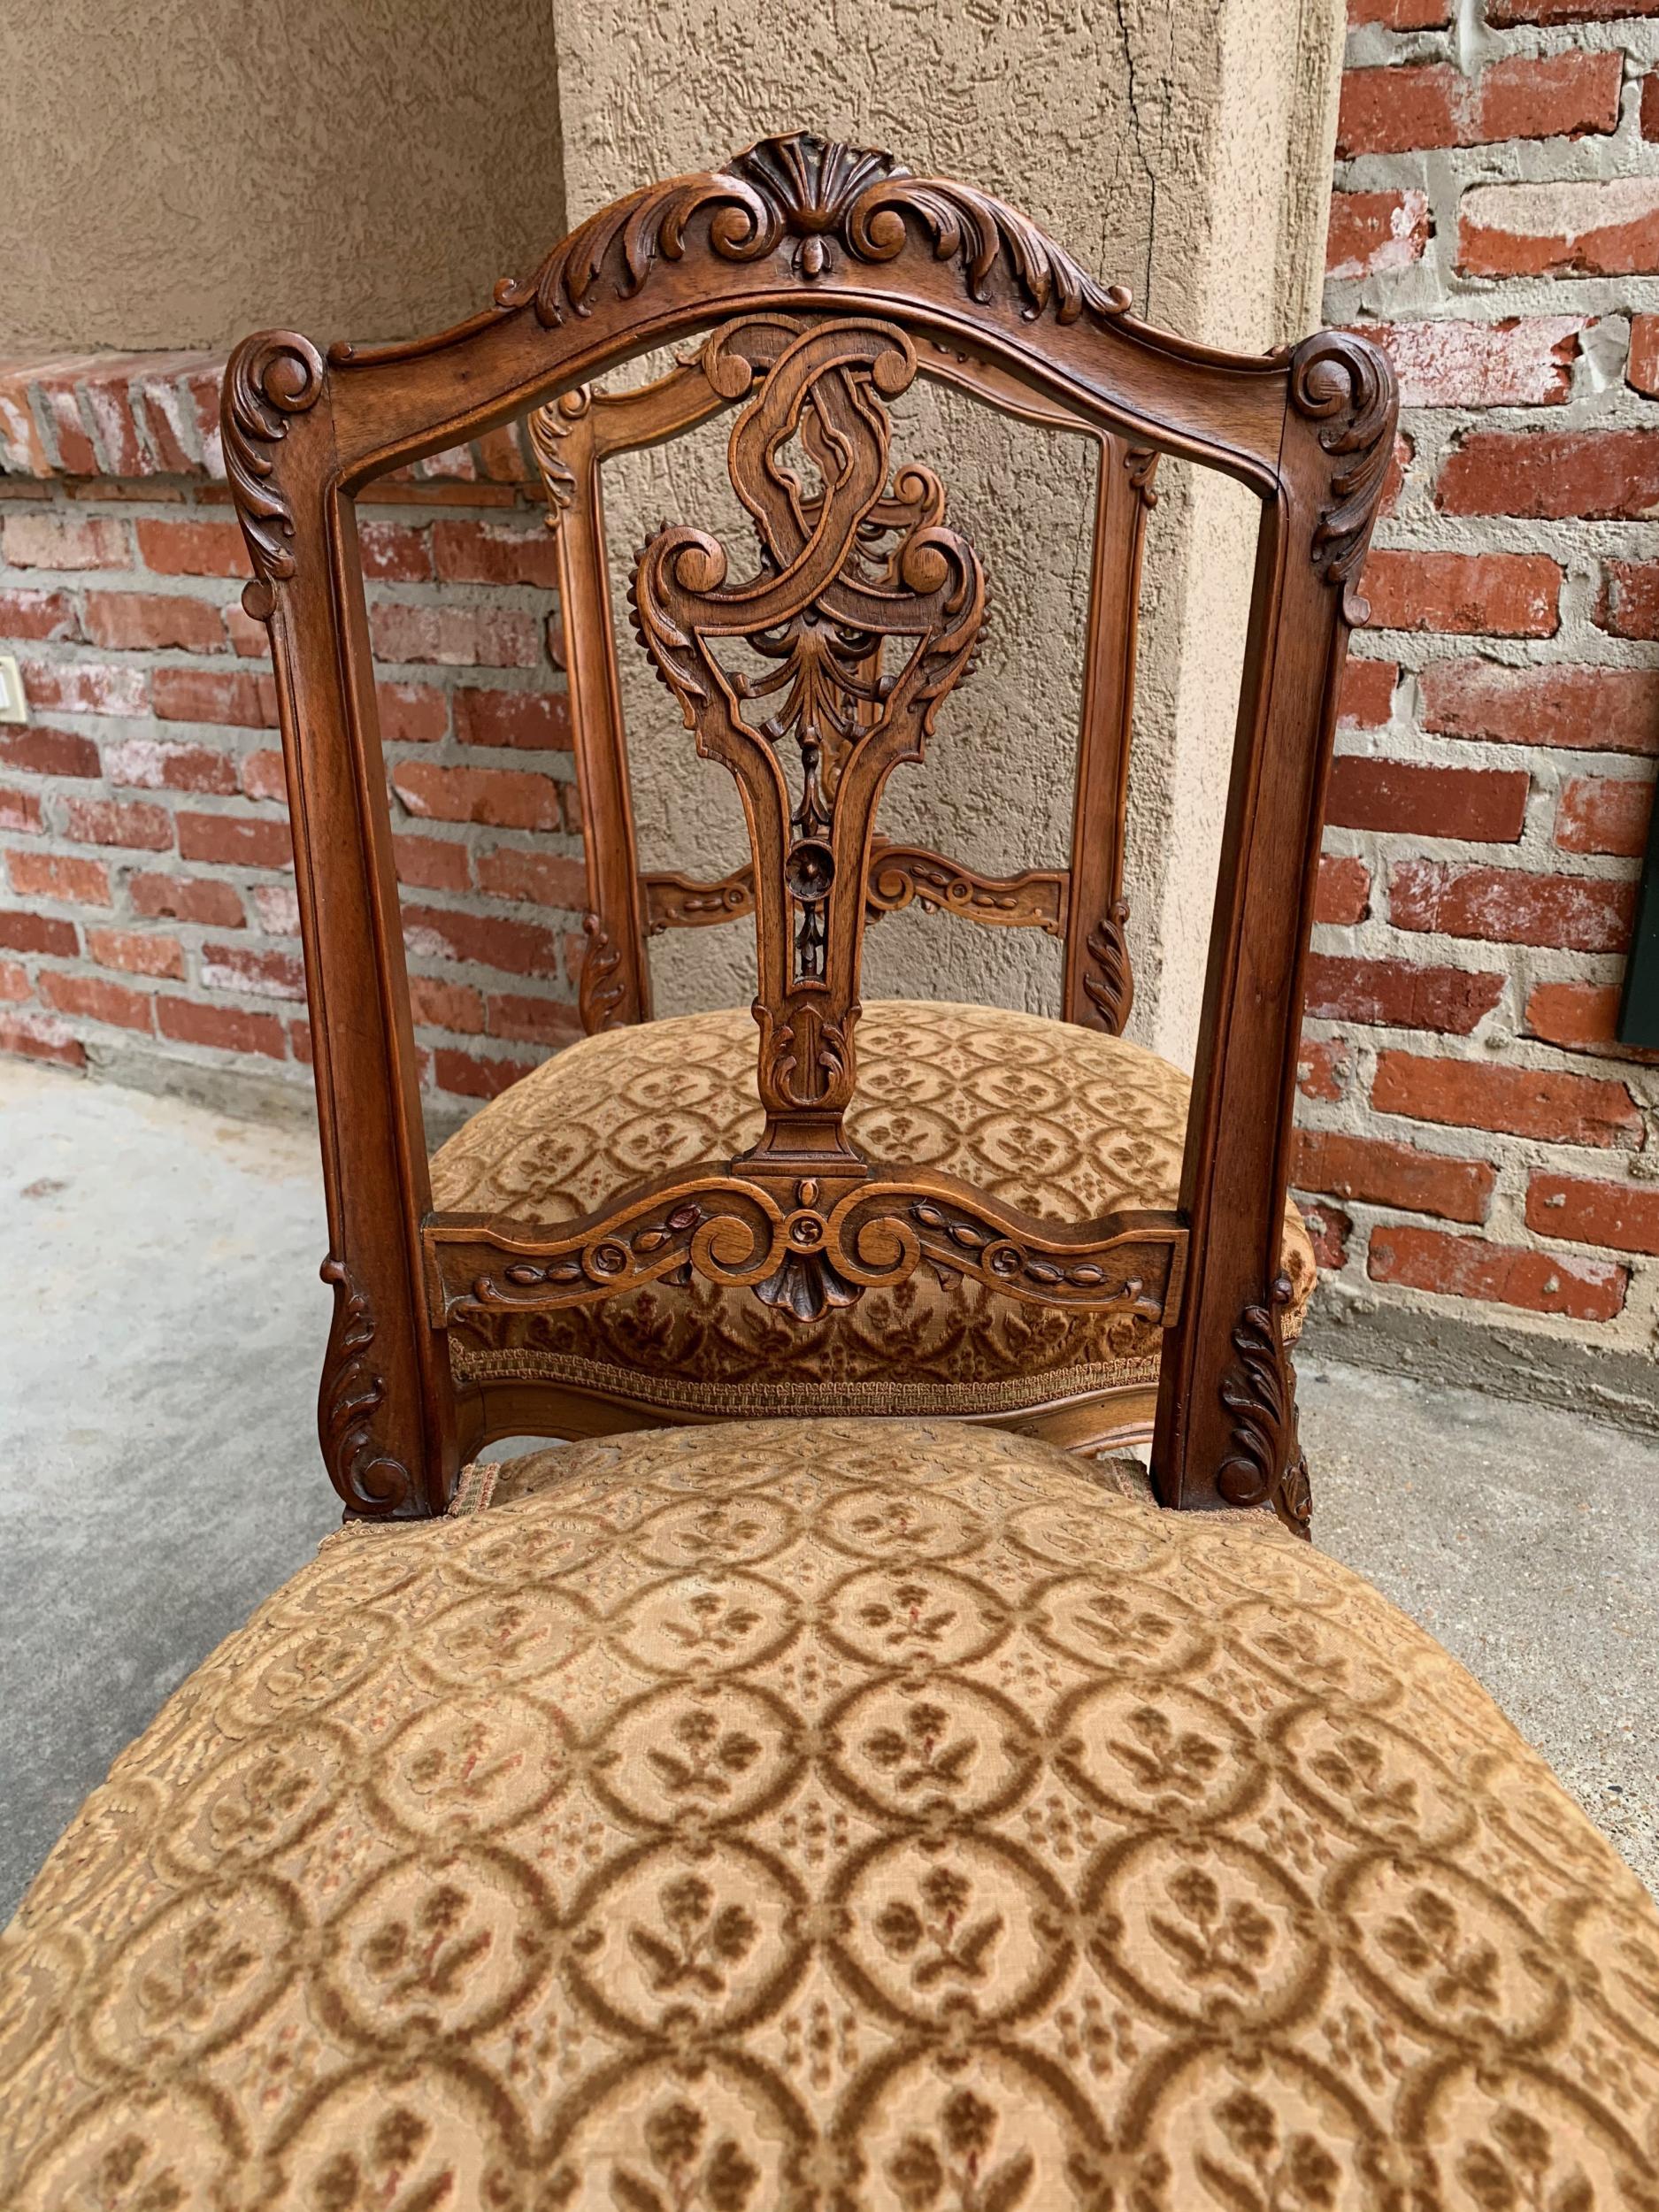 19th Century 19th century SET of 4 French Petite Chair Carved Walnut Louis XV Tea or Vanity